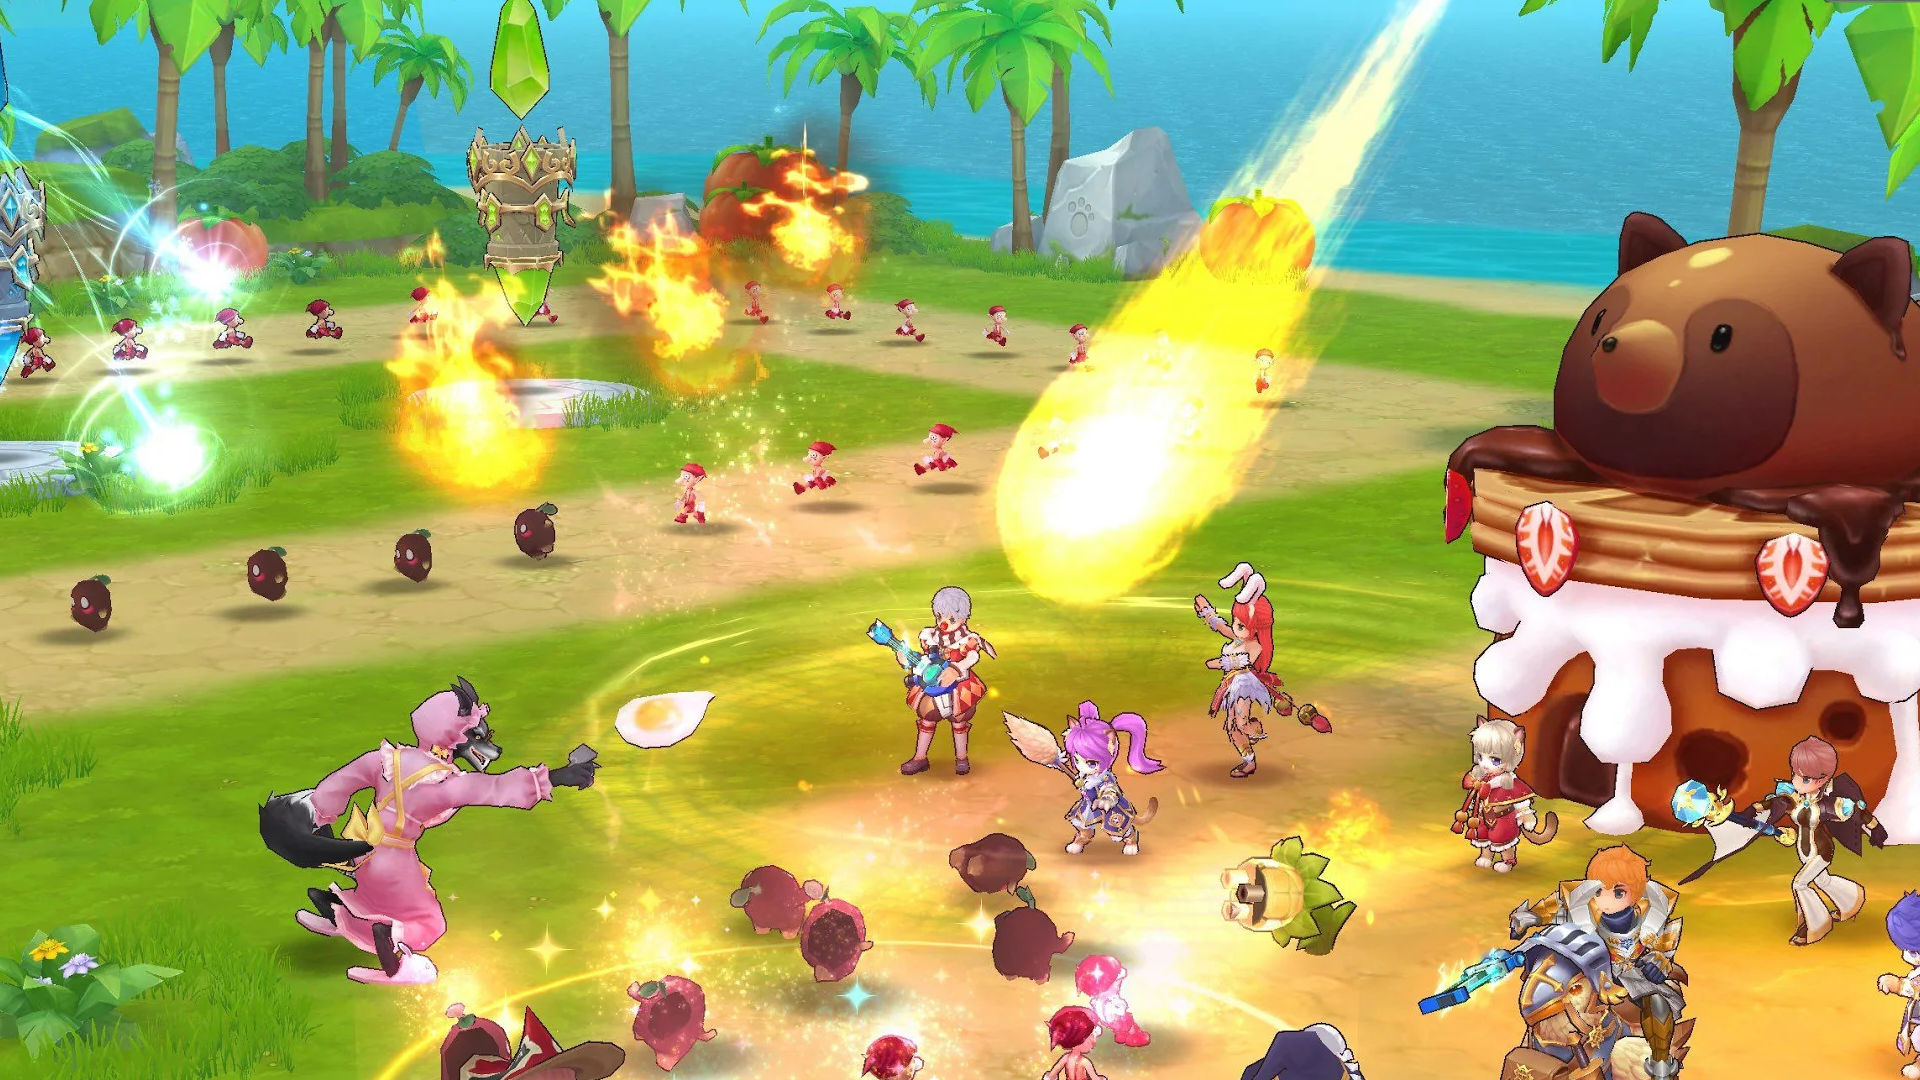 Best mobile MMORPGs: Ragnarok M: Eternal Love. Image shows a bad wolf casting down a ball of fire onto a woman throwing a de-shelled egg.